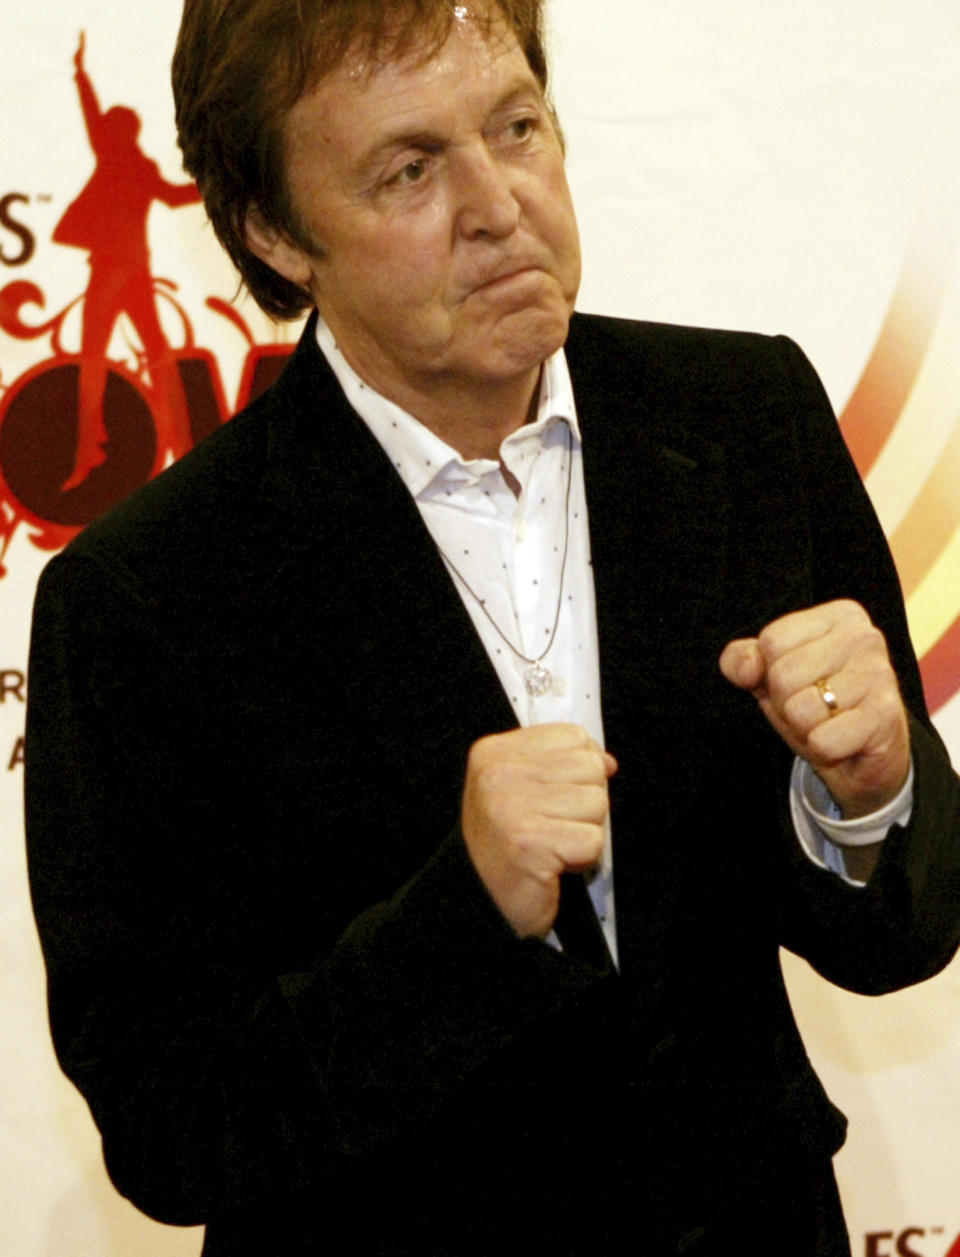 Paul McCartney walks the red carpet at the premiere of "Love," a surrealistic portrayal of the Fab Four's career performed by Cirque du Soleil in Las Vegas, June 30, 2006. On Tuesday, April 9, 2024, it was announced that the final curtain will come down July 7 on Cirque du Soleil's long-running show “The Beatles Love," a cultural icon on the Las Vegas Strip that brought band members Paul McCartney and Ringo Starr back together for public appearances throughout its 18-year run. (Isaac Brekken/Las Vegas Review-Journal via AP)